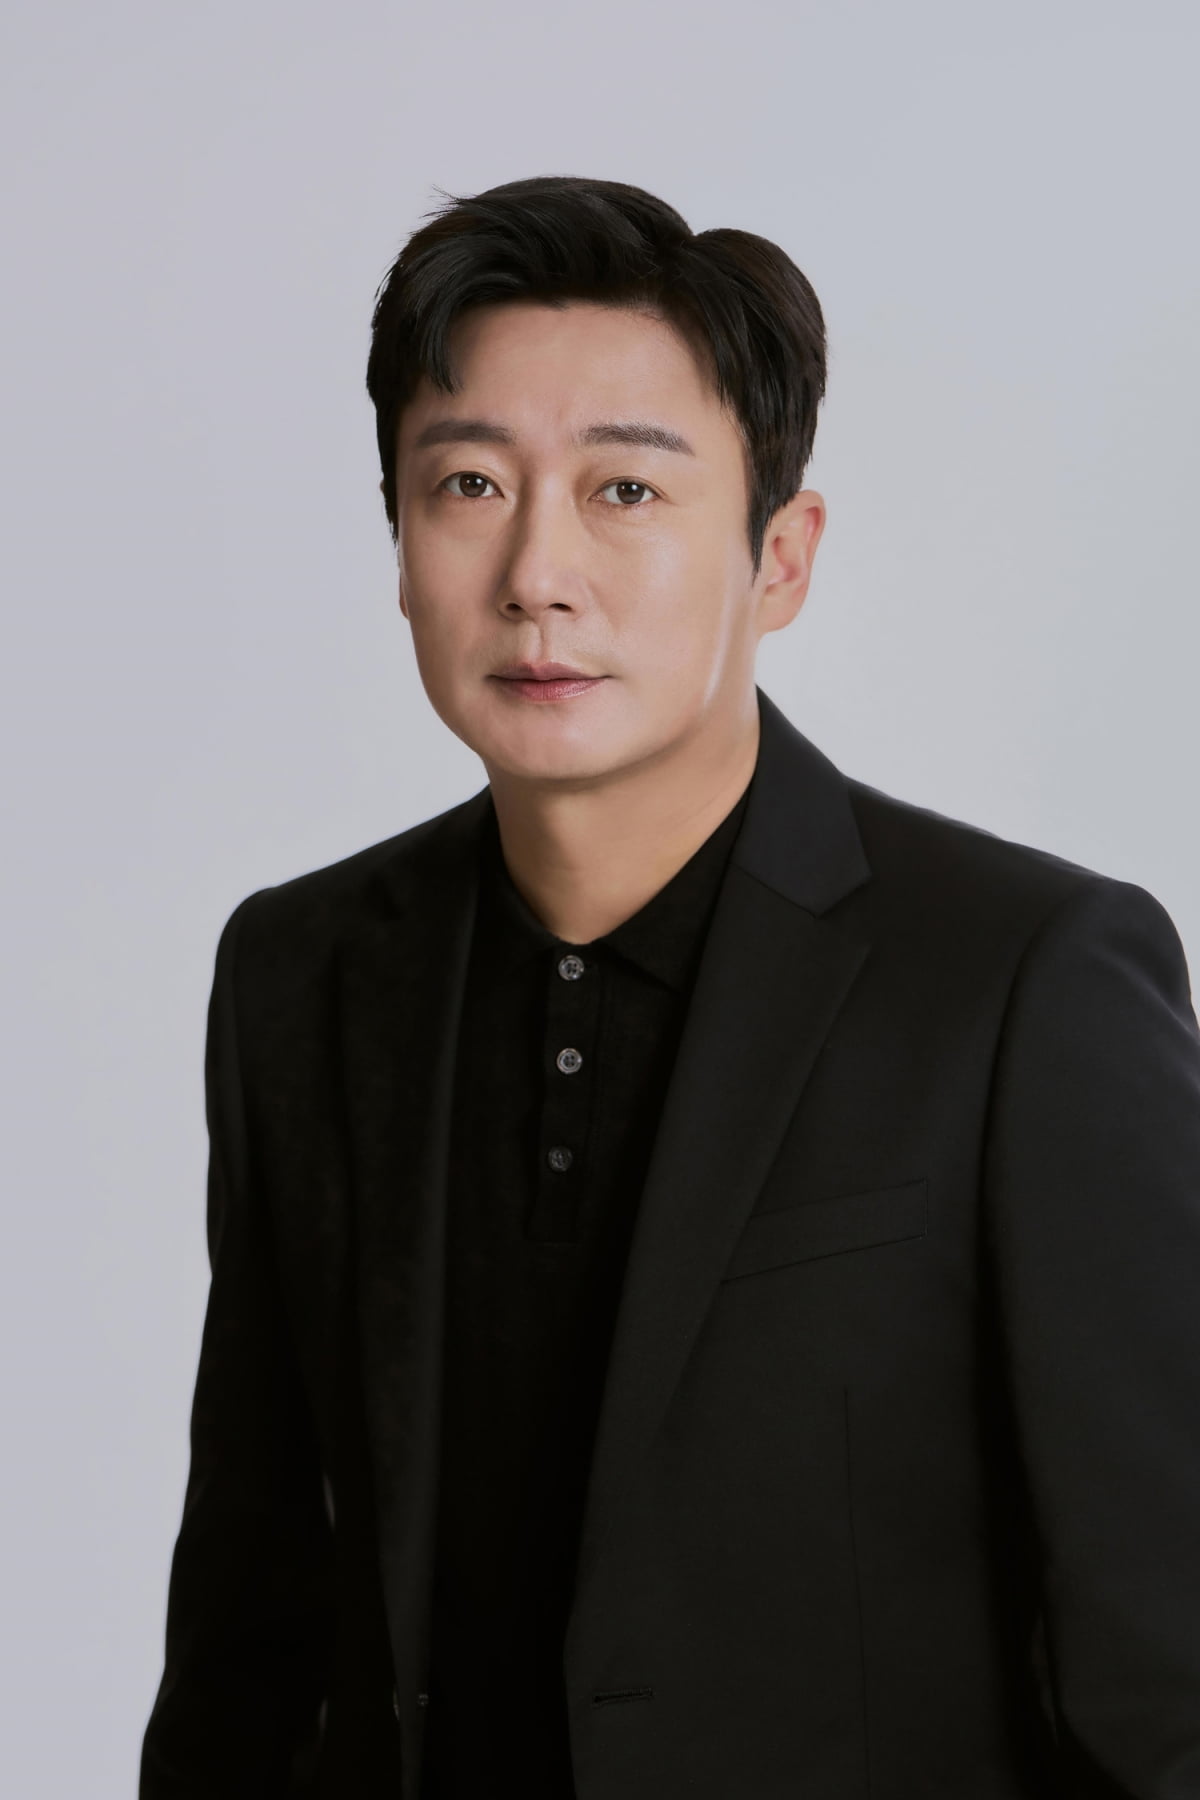 Lee Soo-geun leaves SM C&C after 10 years of service and signs exclusive contract with Big Planet Made